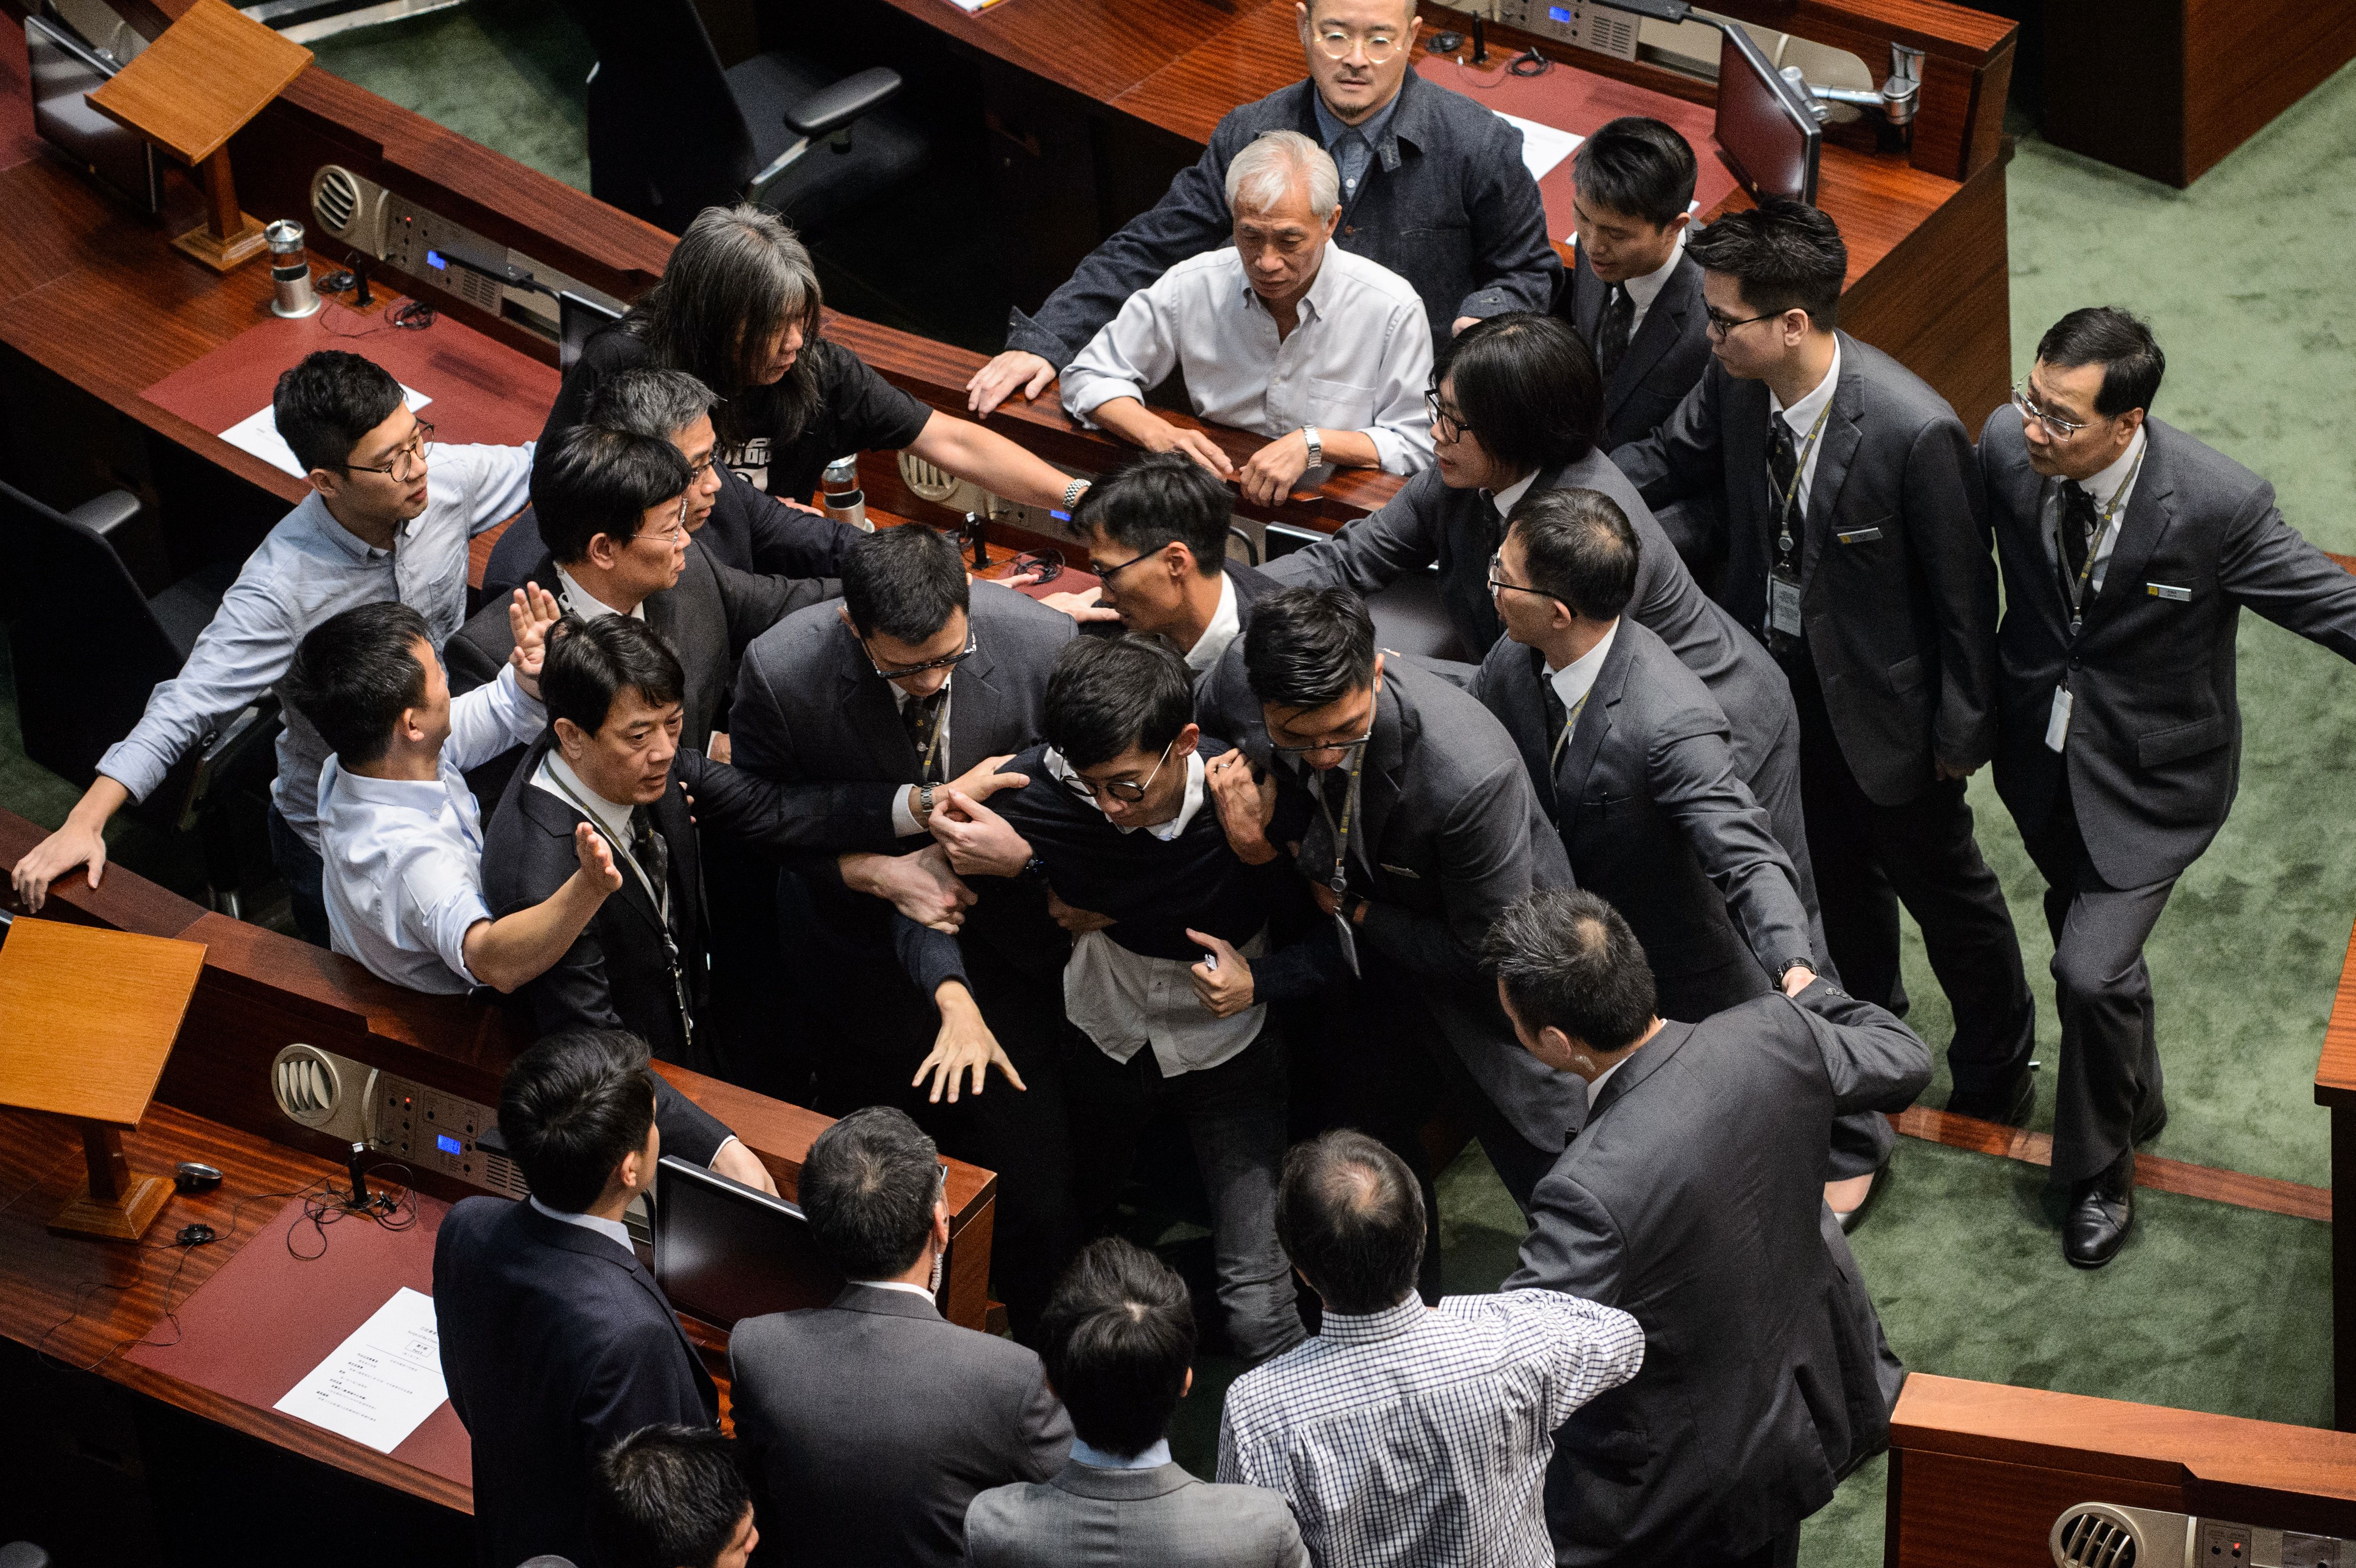 Newly elected lawmaker Sixtus "Baggio" Leung, center, is restrained by security after attempting to read out his oath of office at the Legislative Council in Hong Kong on Nov. 2, 2016 (Anthony Wallace—AFP/Getty Images)